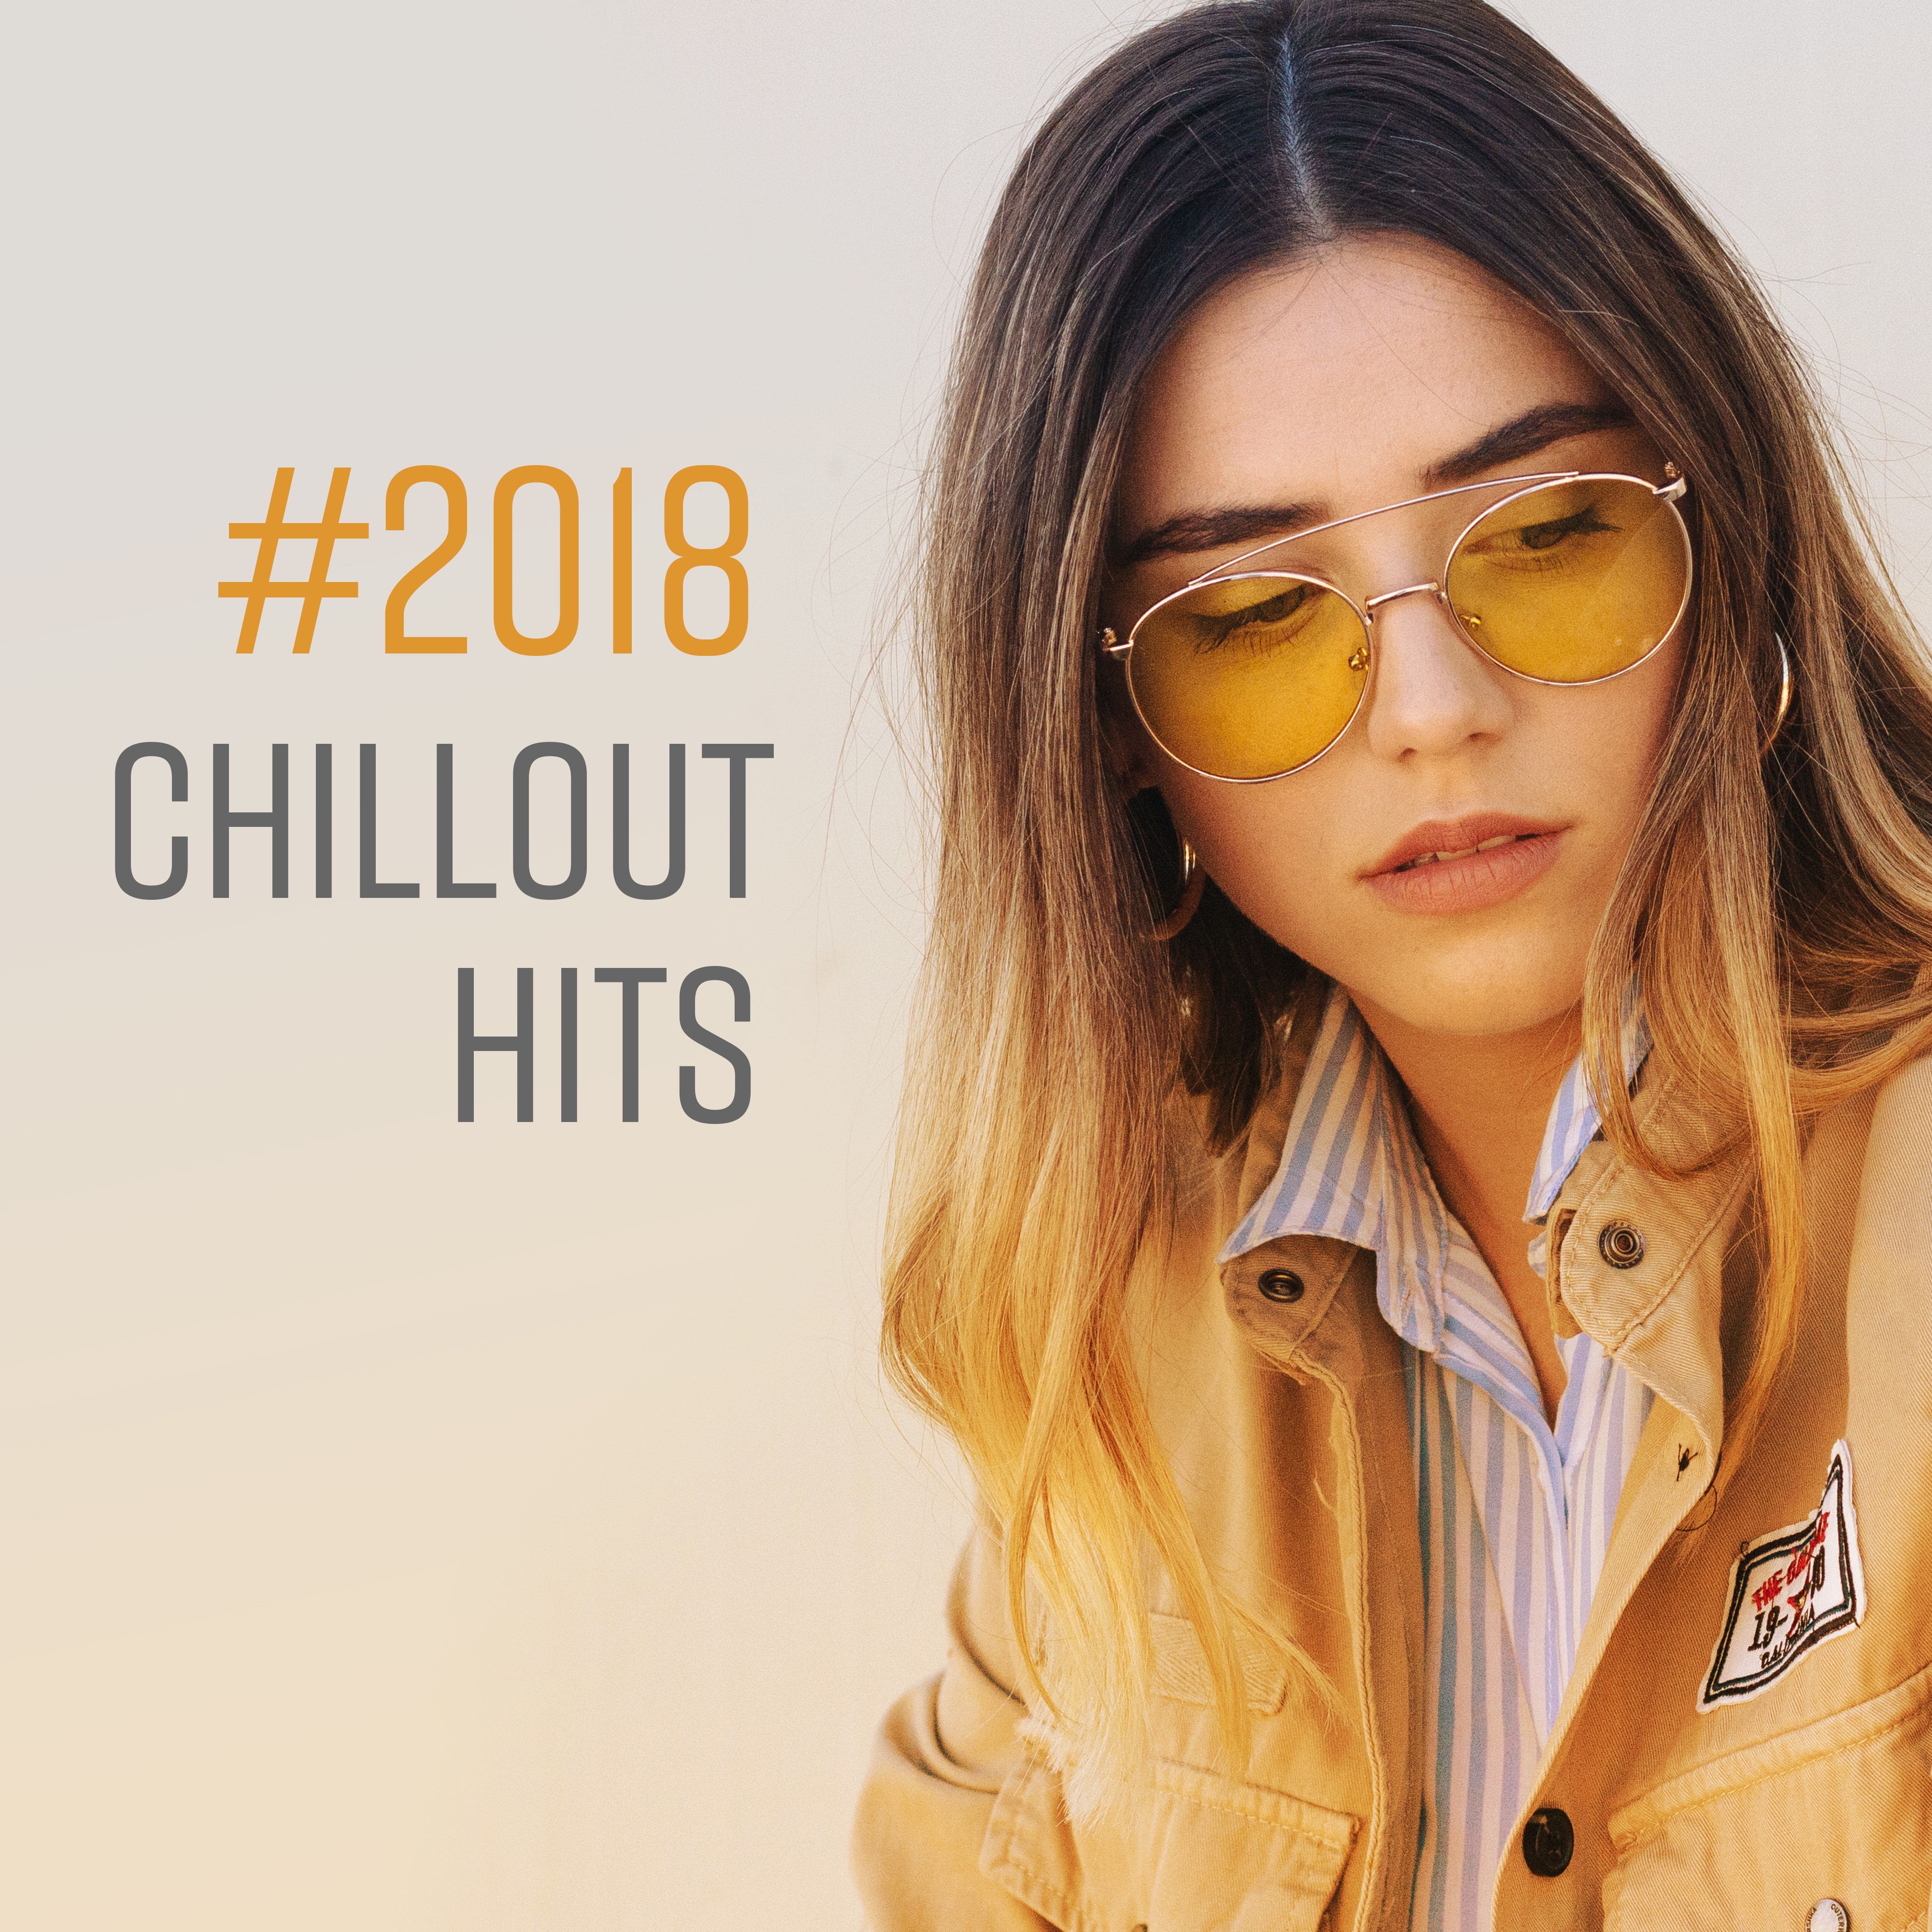 #2018 Chillout Hits